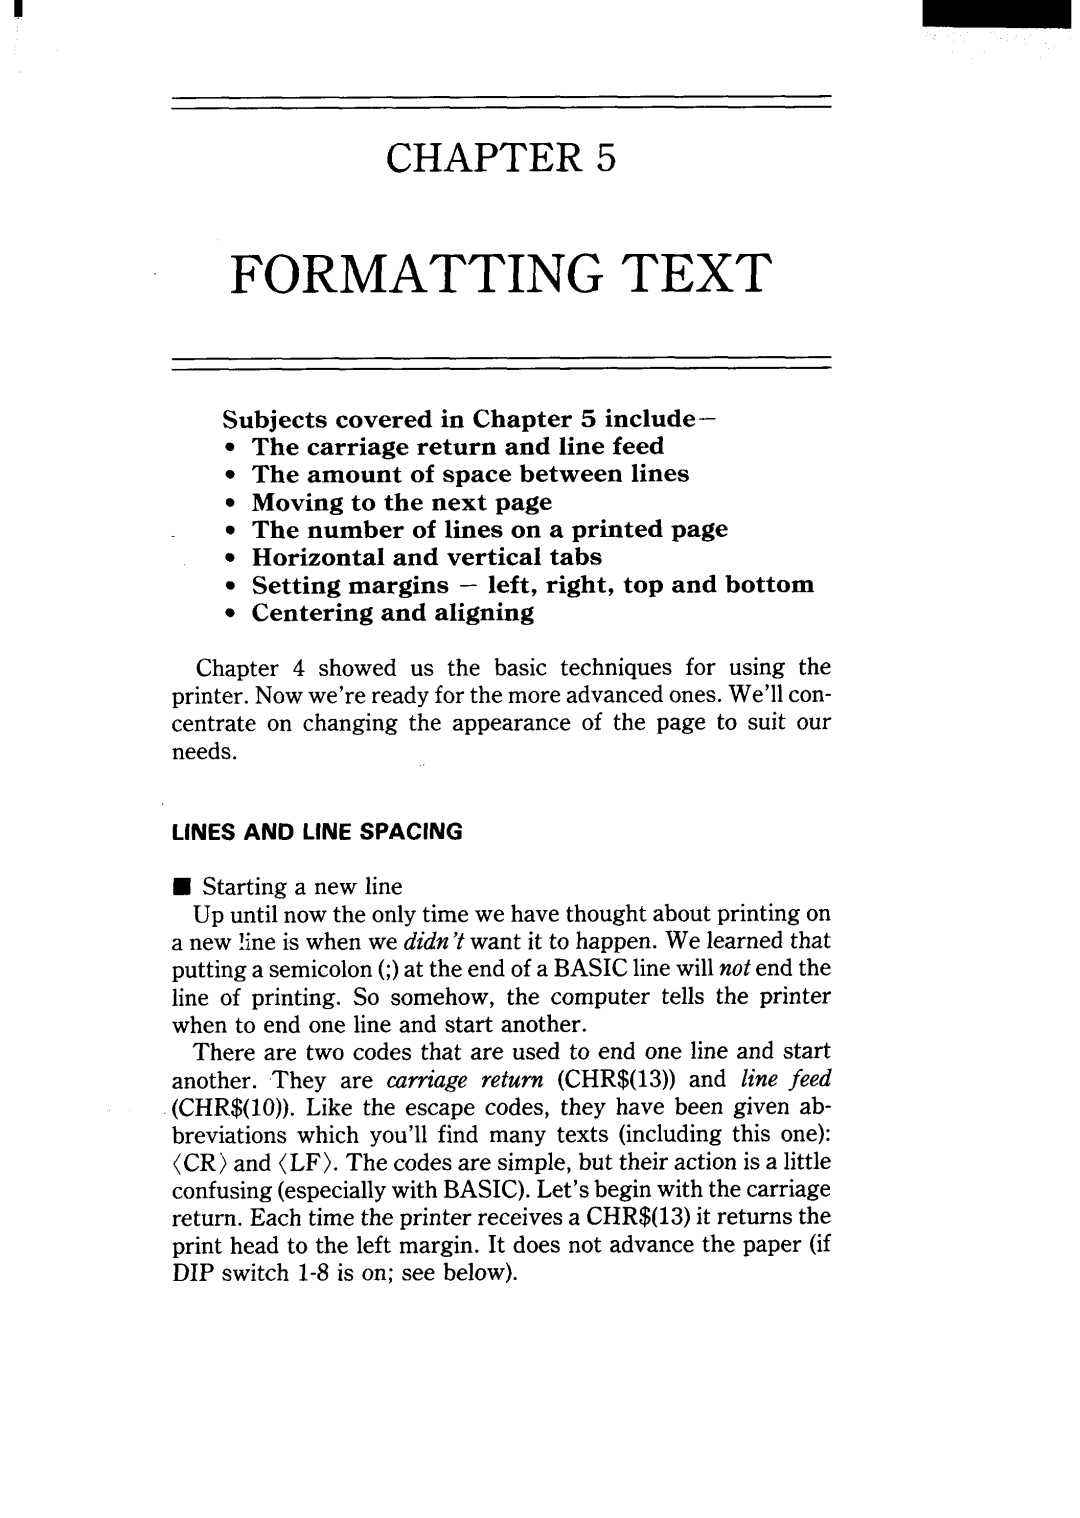 Star Micronics NX-15 user manual Formatting Text, Chapter, Subjectscoveredin include 